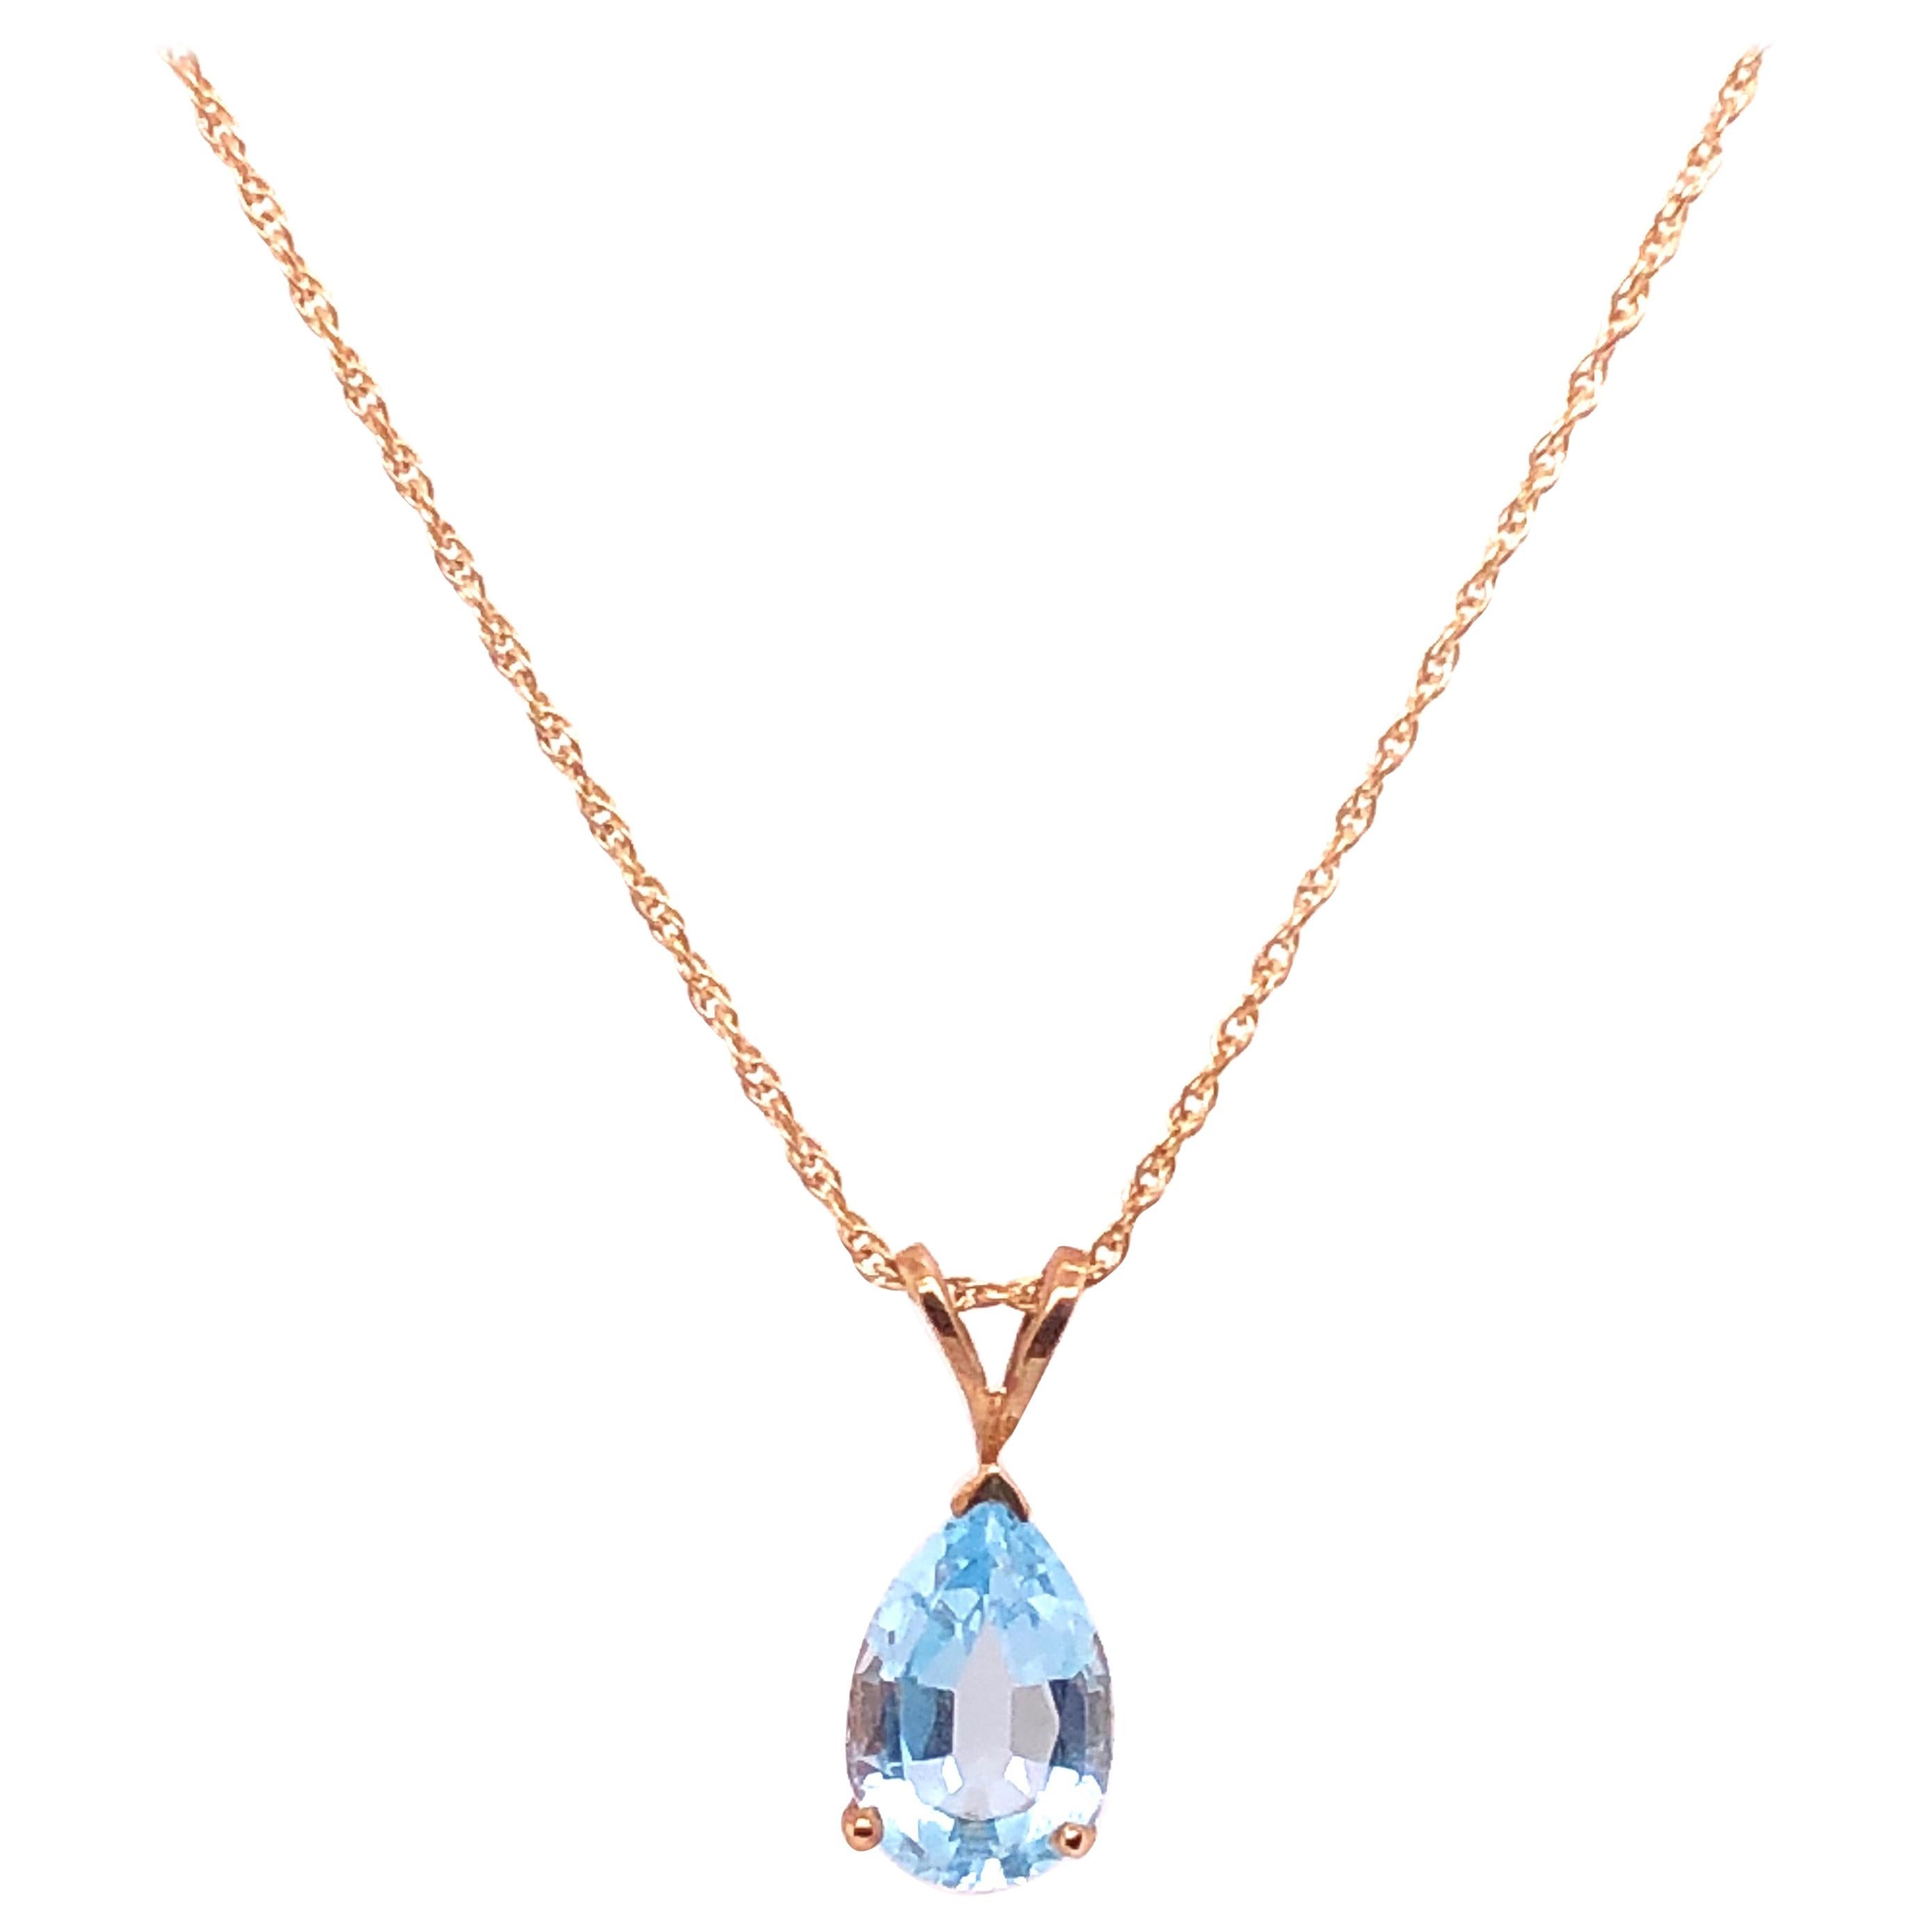 14 Karat Yellow Gold Freeform Necklace with One Pear Blue Topaz Pendant